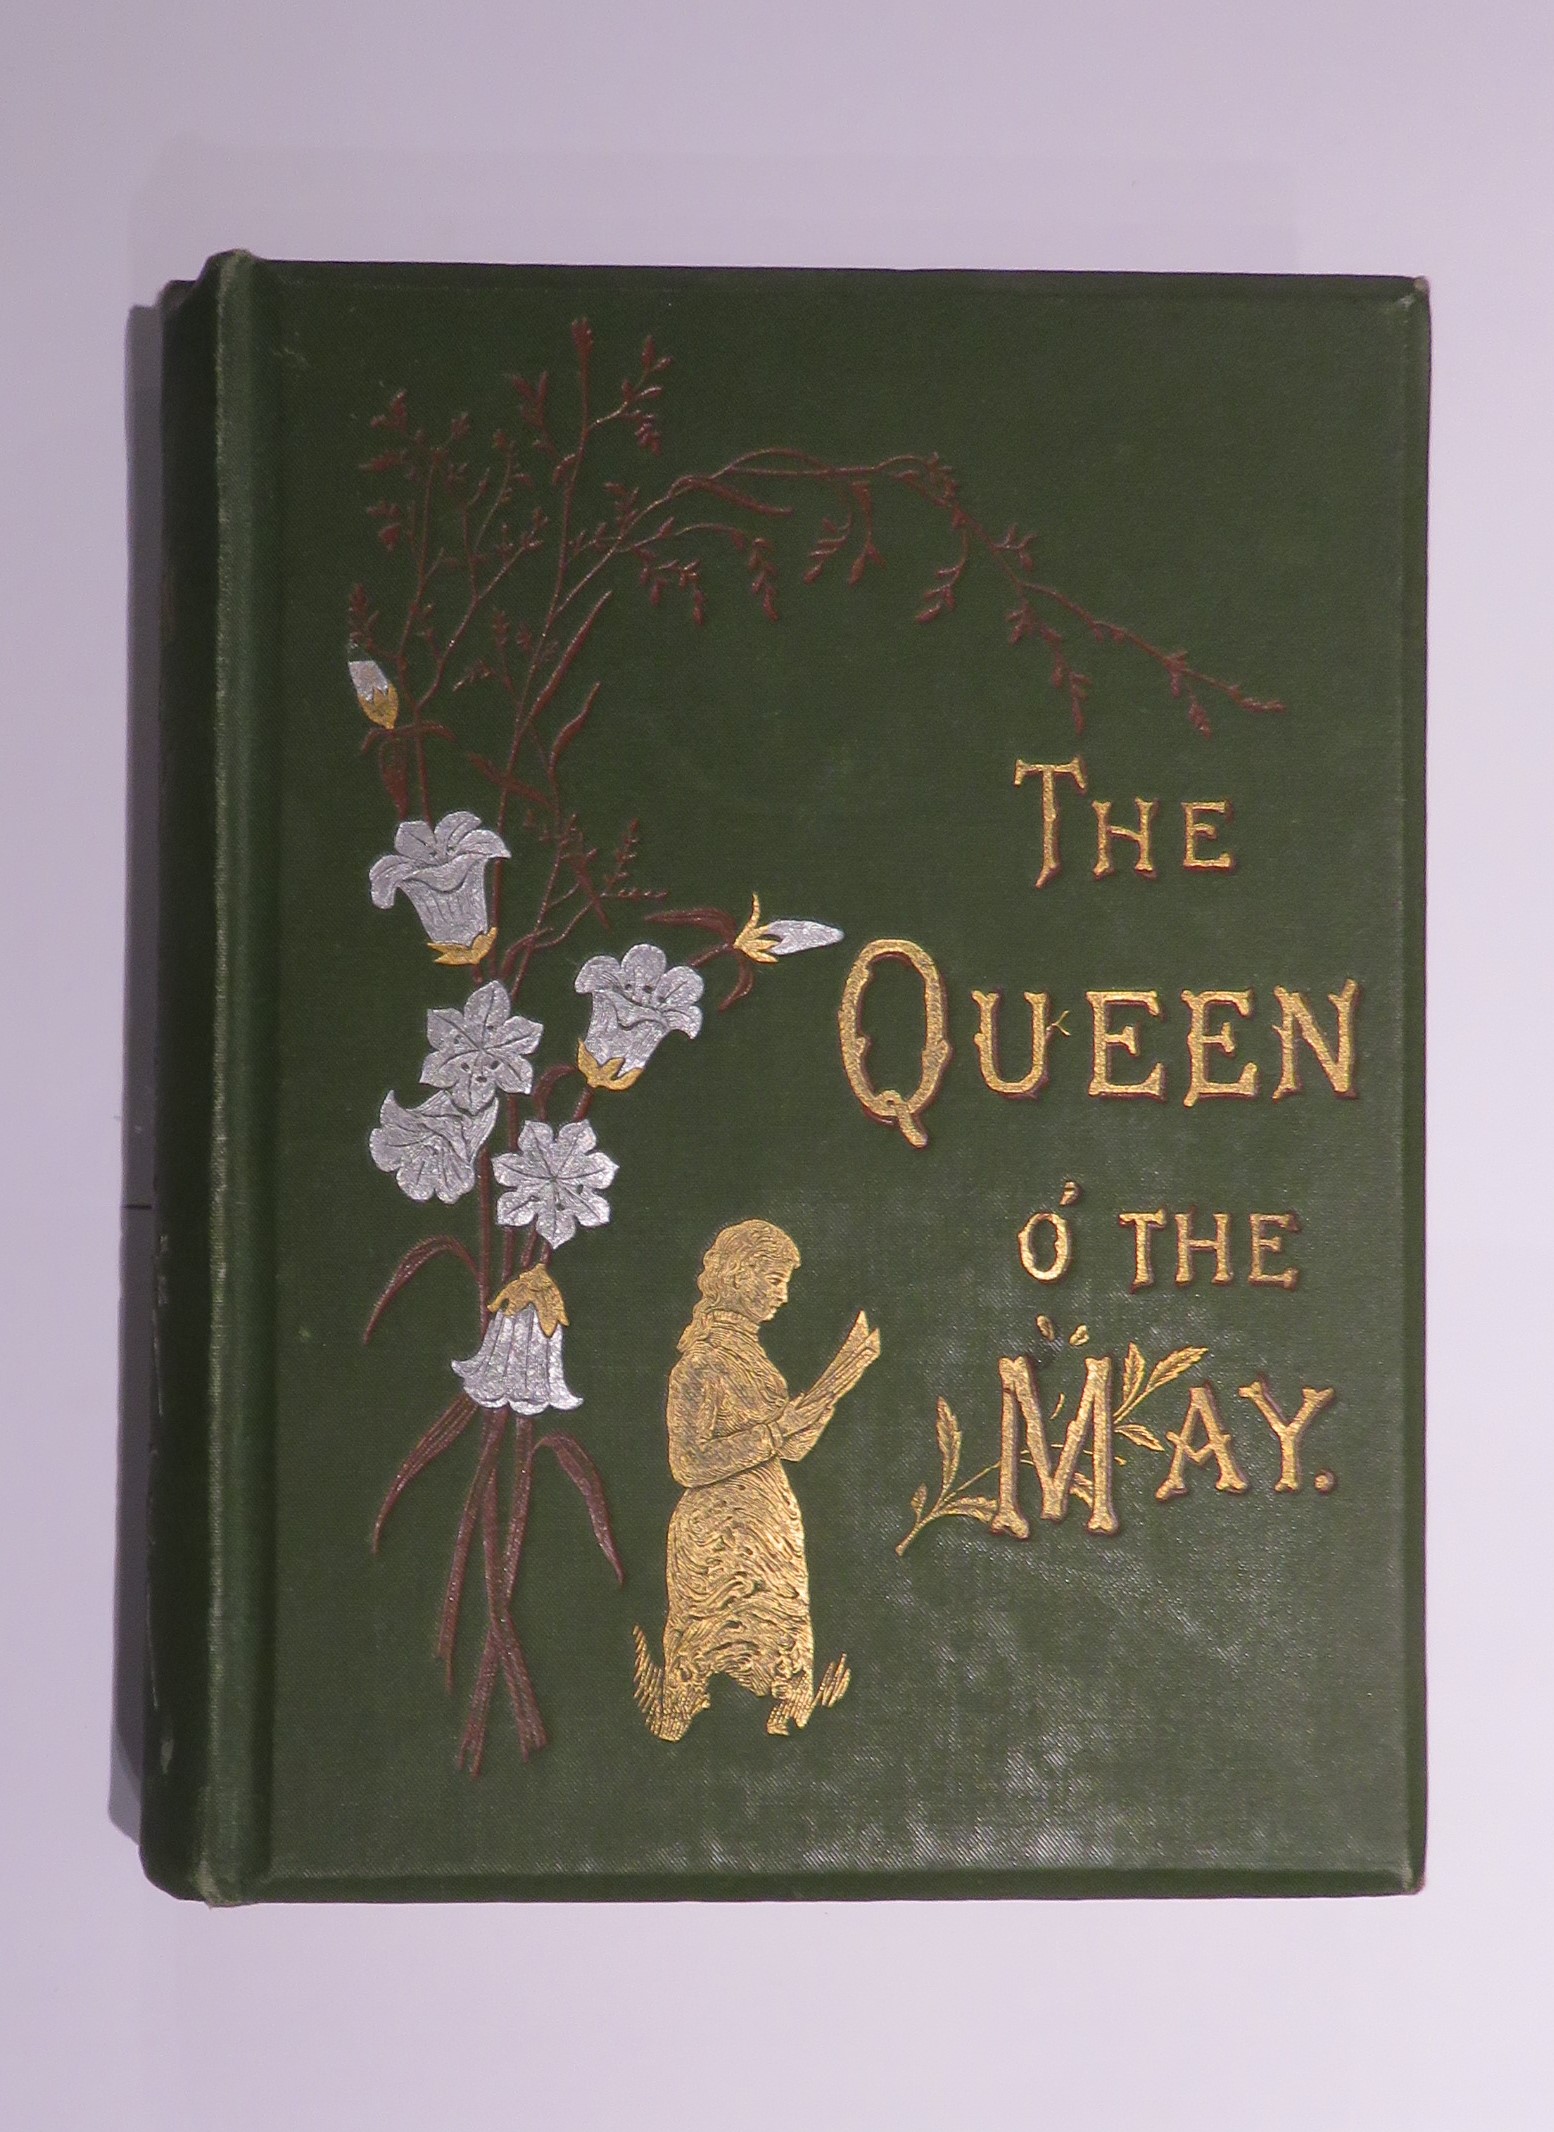 The Queen o' the May